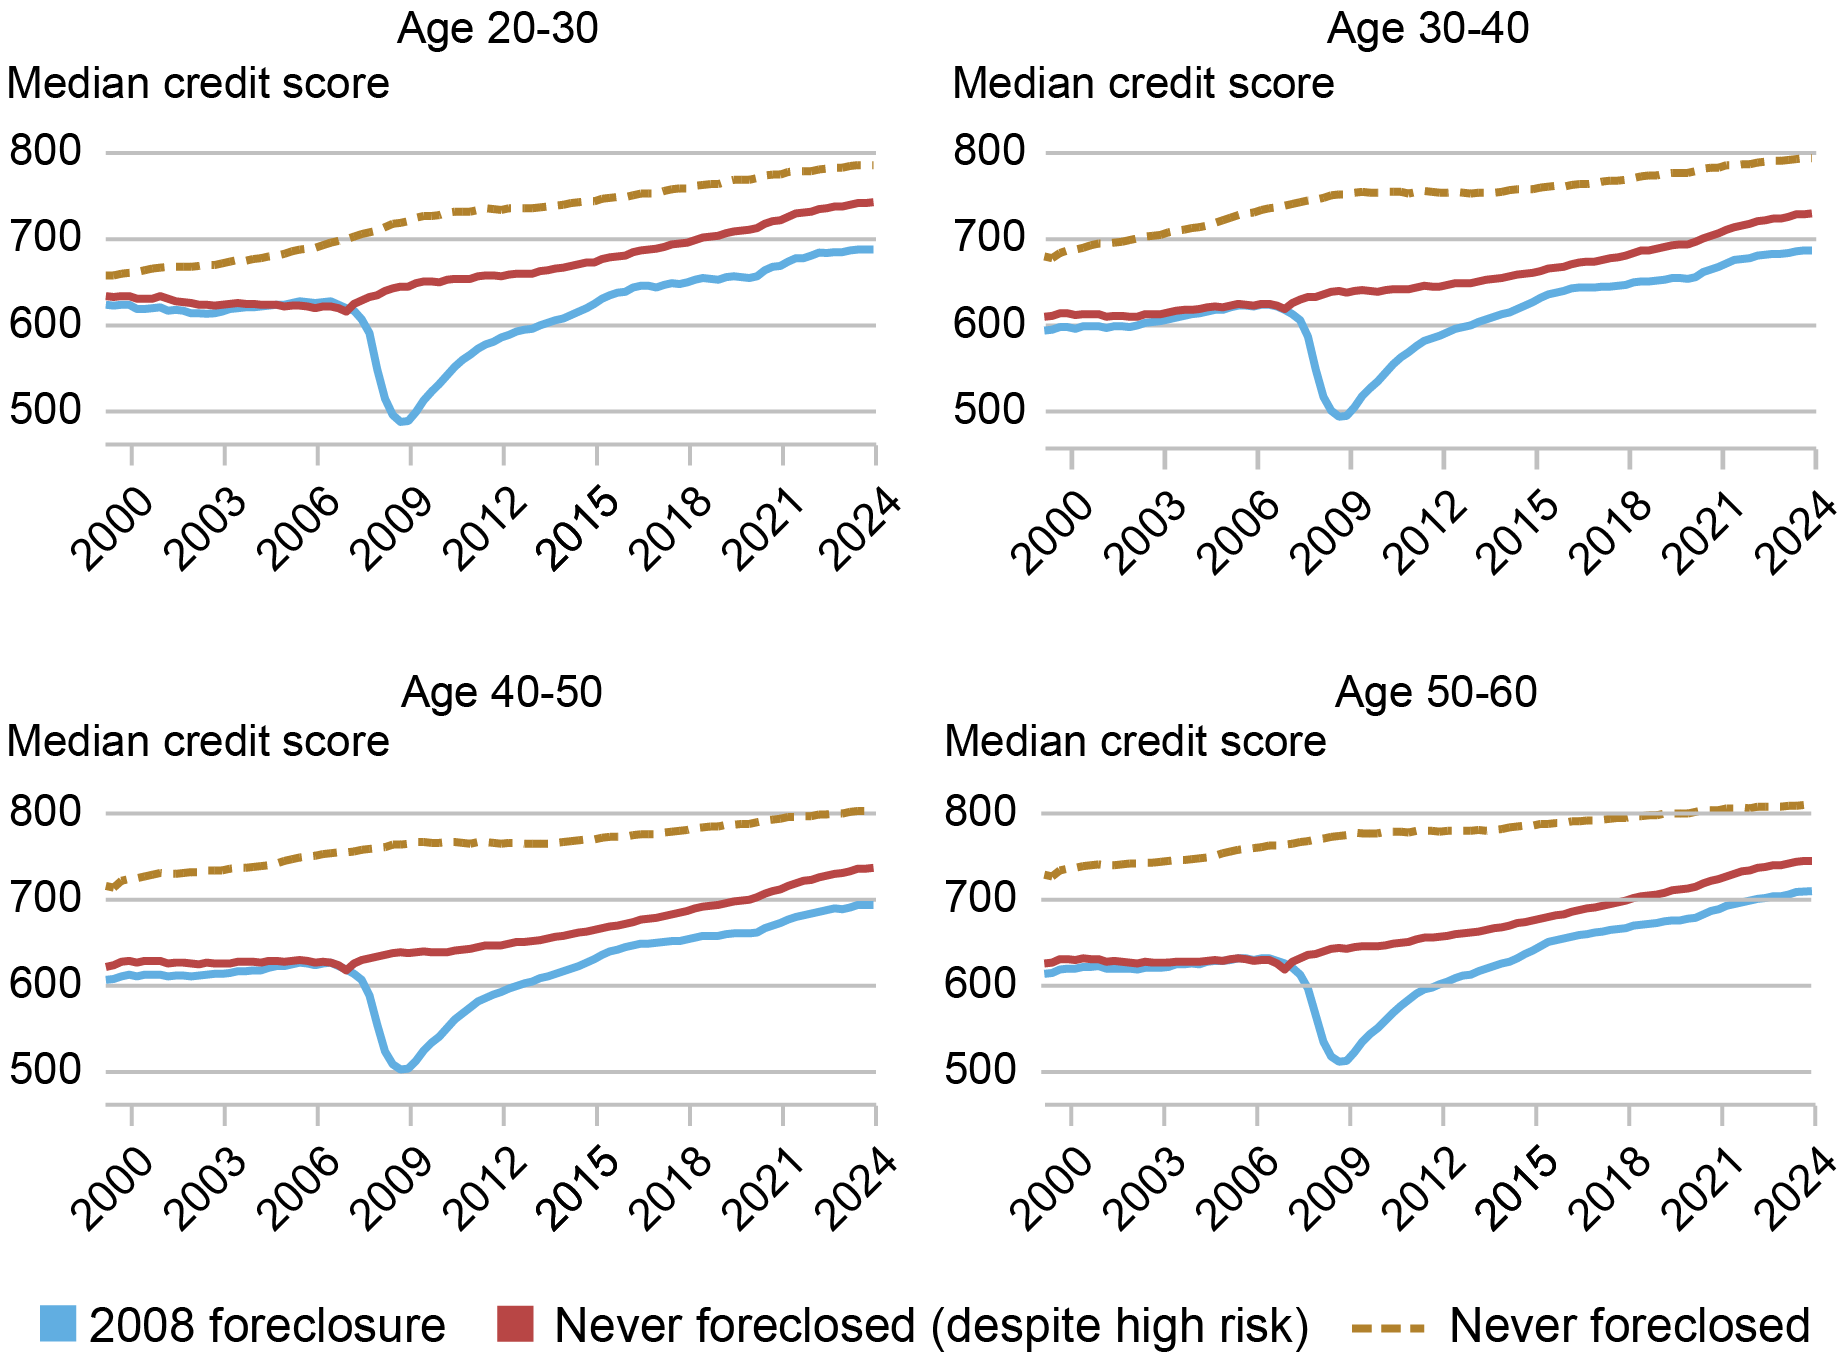 Alt=”Four line charts showing median credit scores for individuals with a 2008 foreclosure (blue), those who never foreclosed despite high risk (red), and those who never foreclosed (gold dotted) for four age groups: age 20-30 (top left), age 30-40 (top right), age 40-50 (bottom left), age 50-60 (bottom right), from 2000 through 2024” 